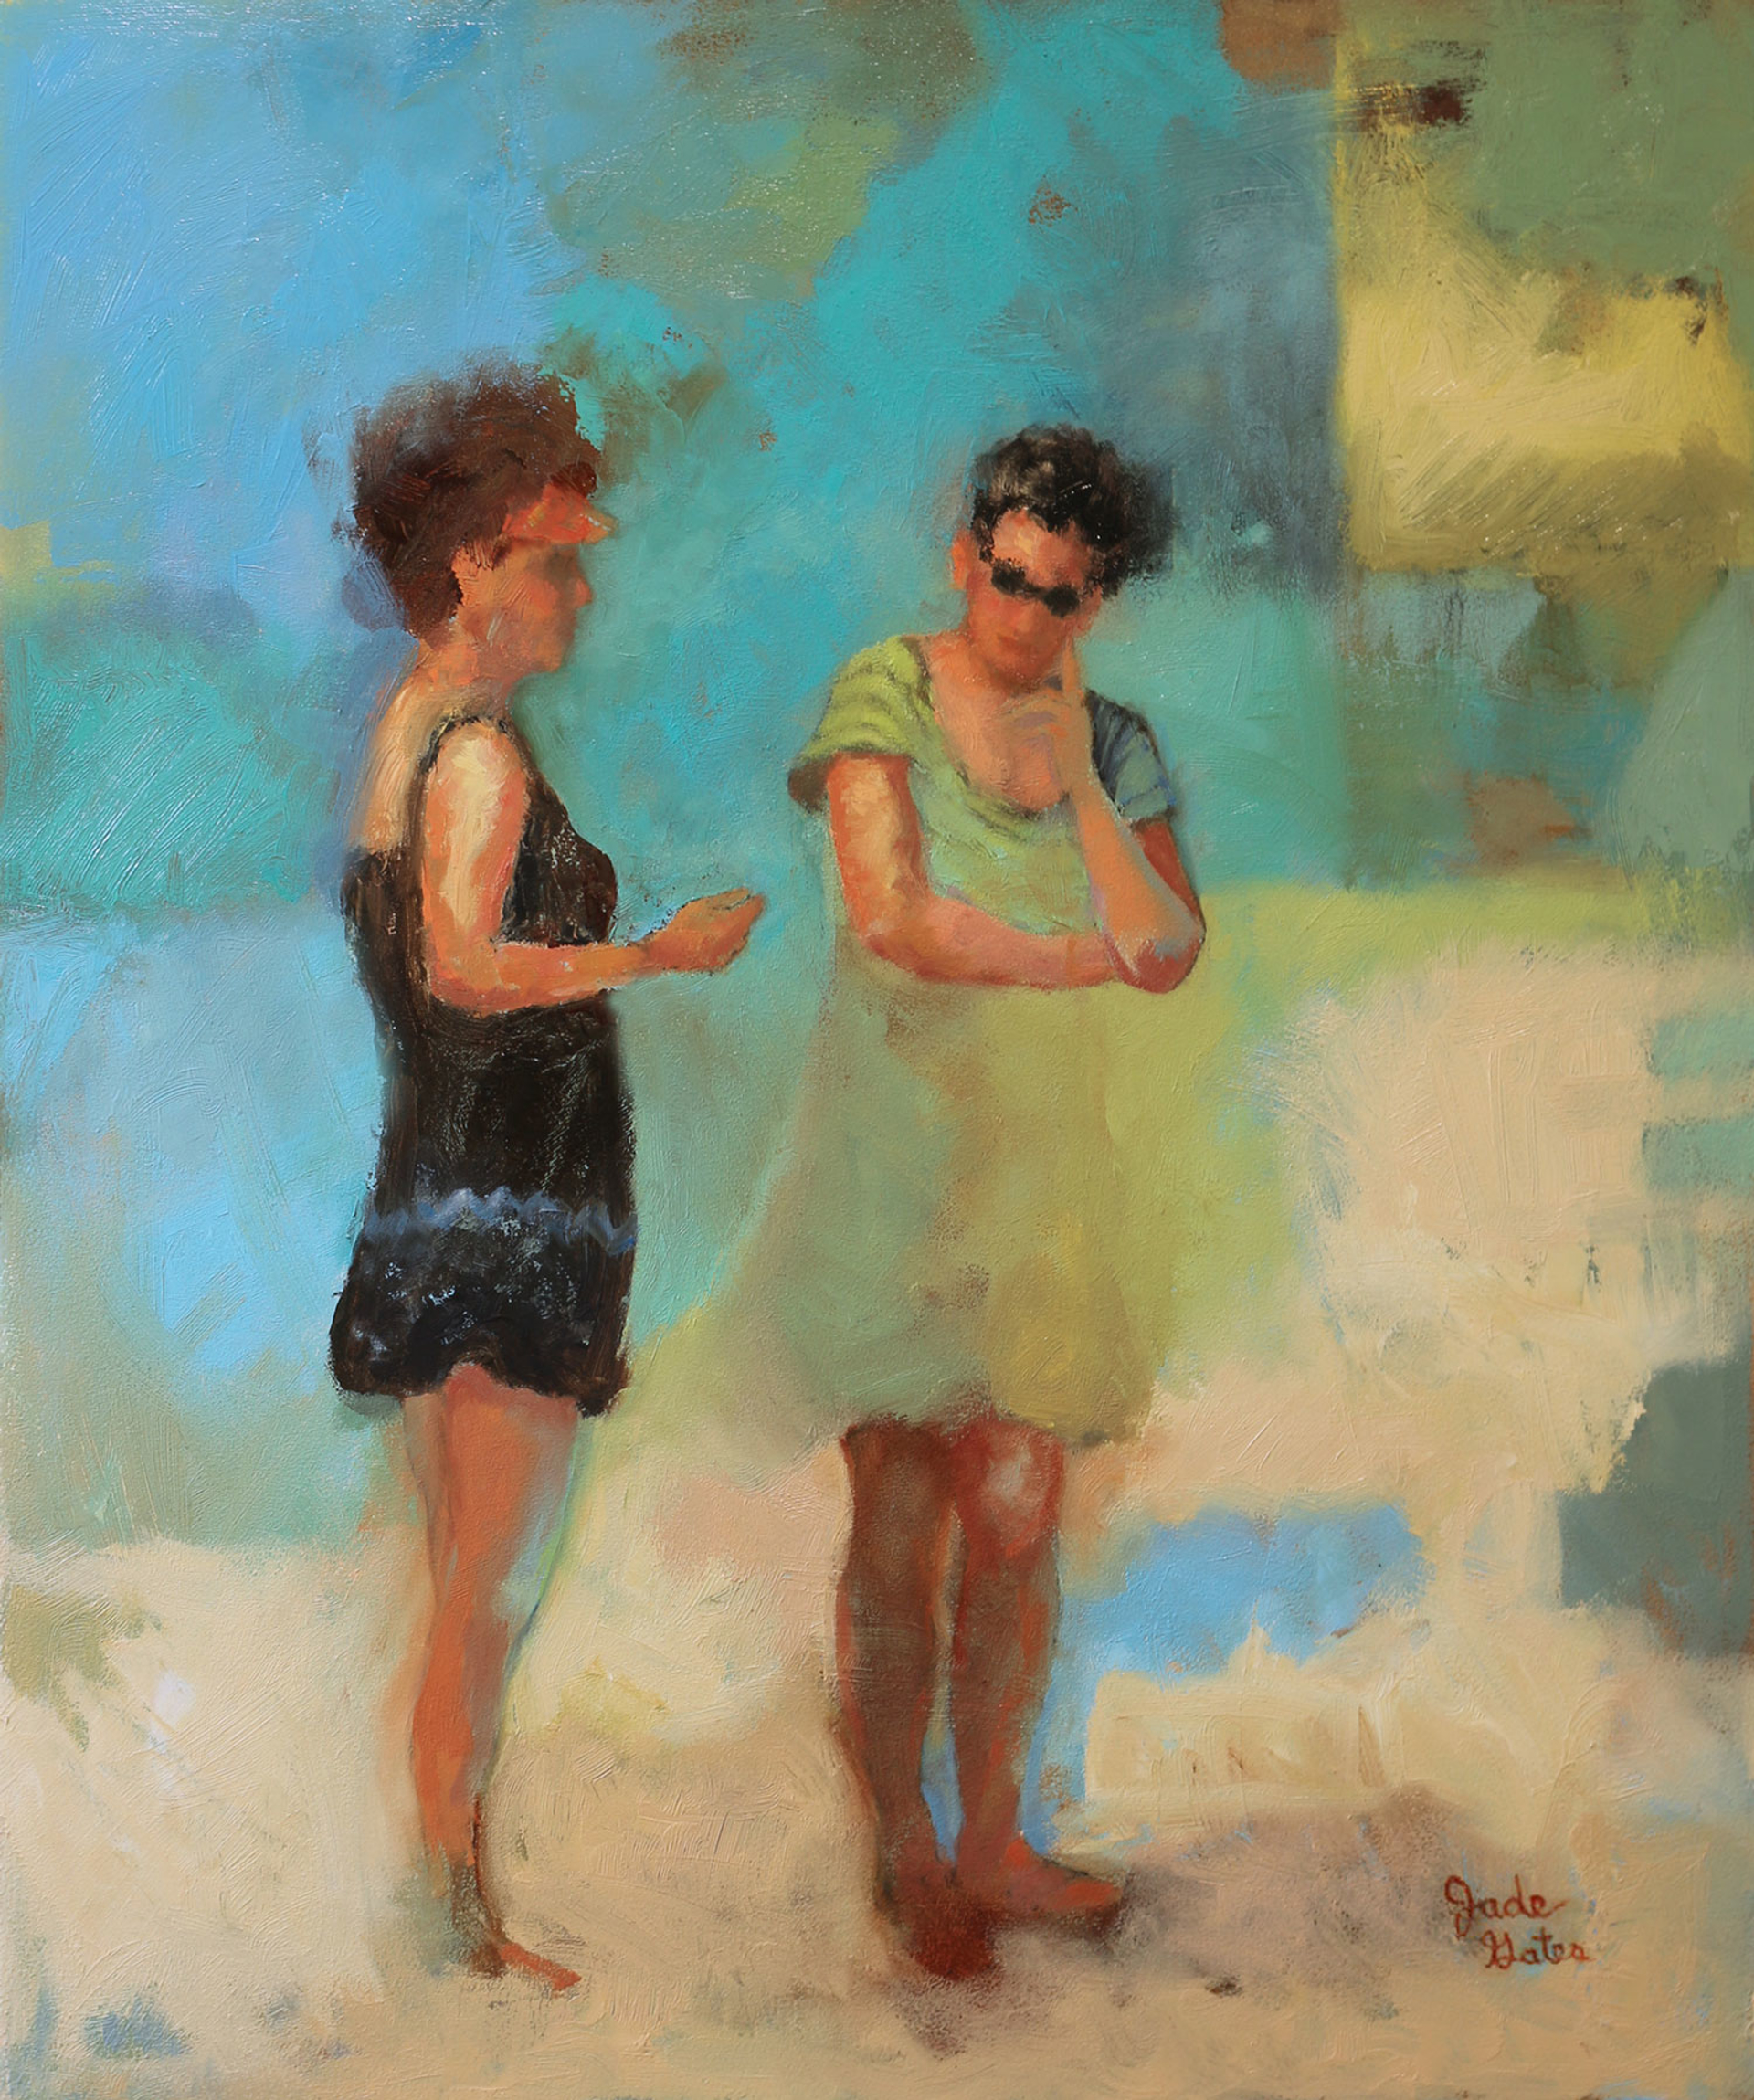 Conversation at the Shore by Jade Gates